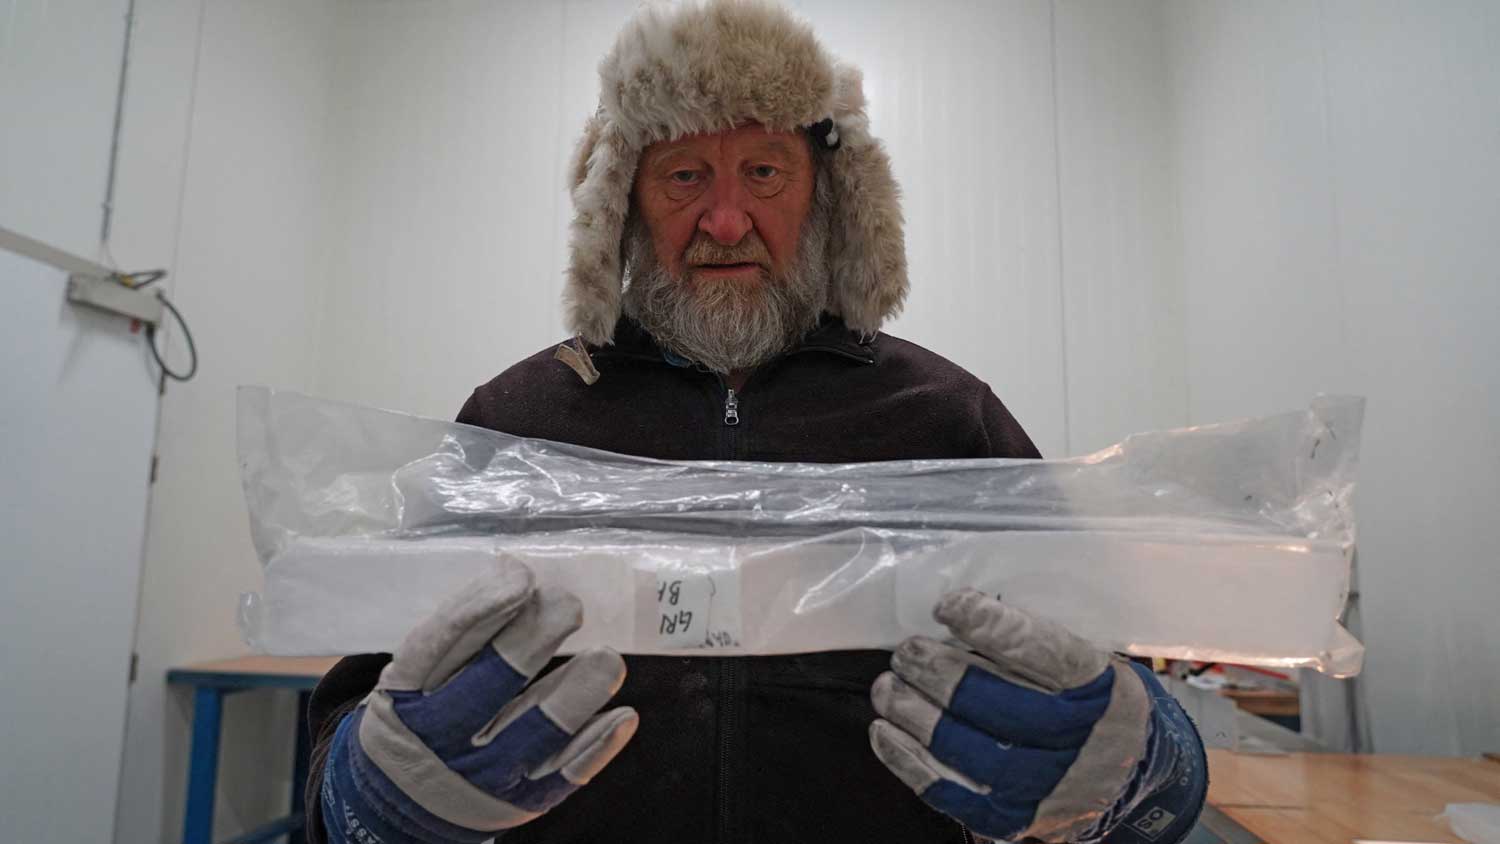 A man wearing a fur hat and gloves holds out a core of ice in a labeled plastic bag.